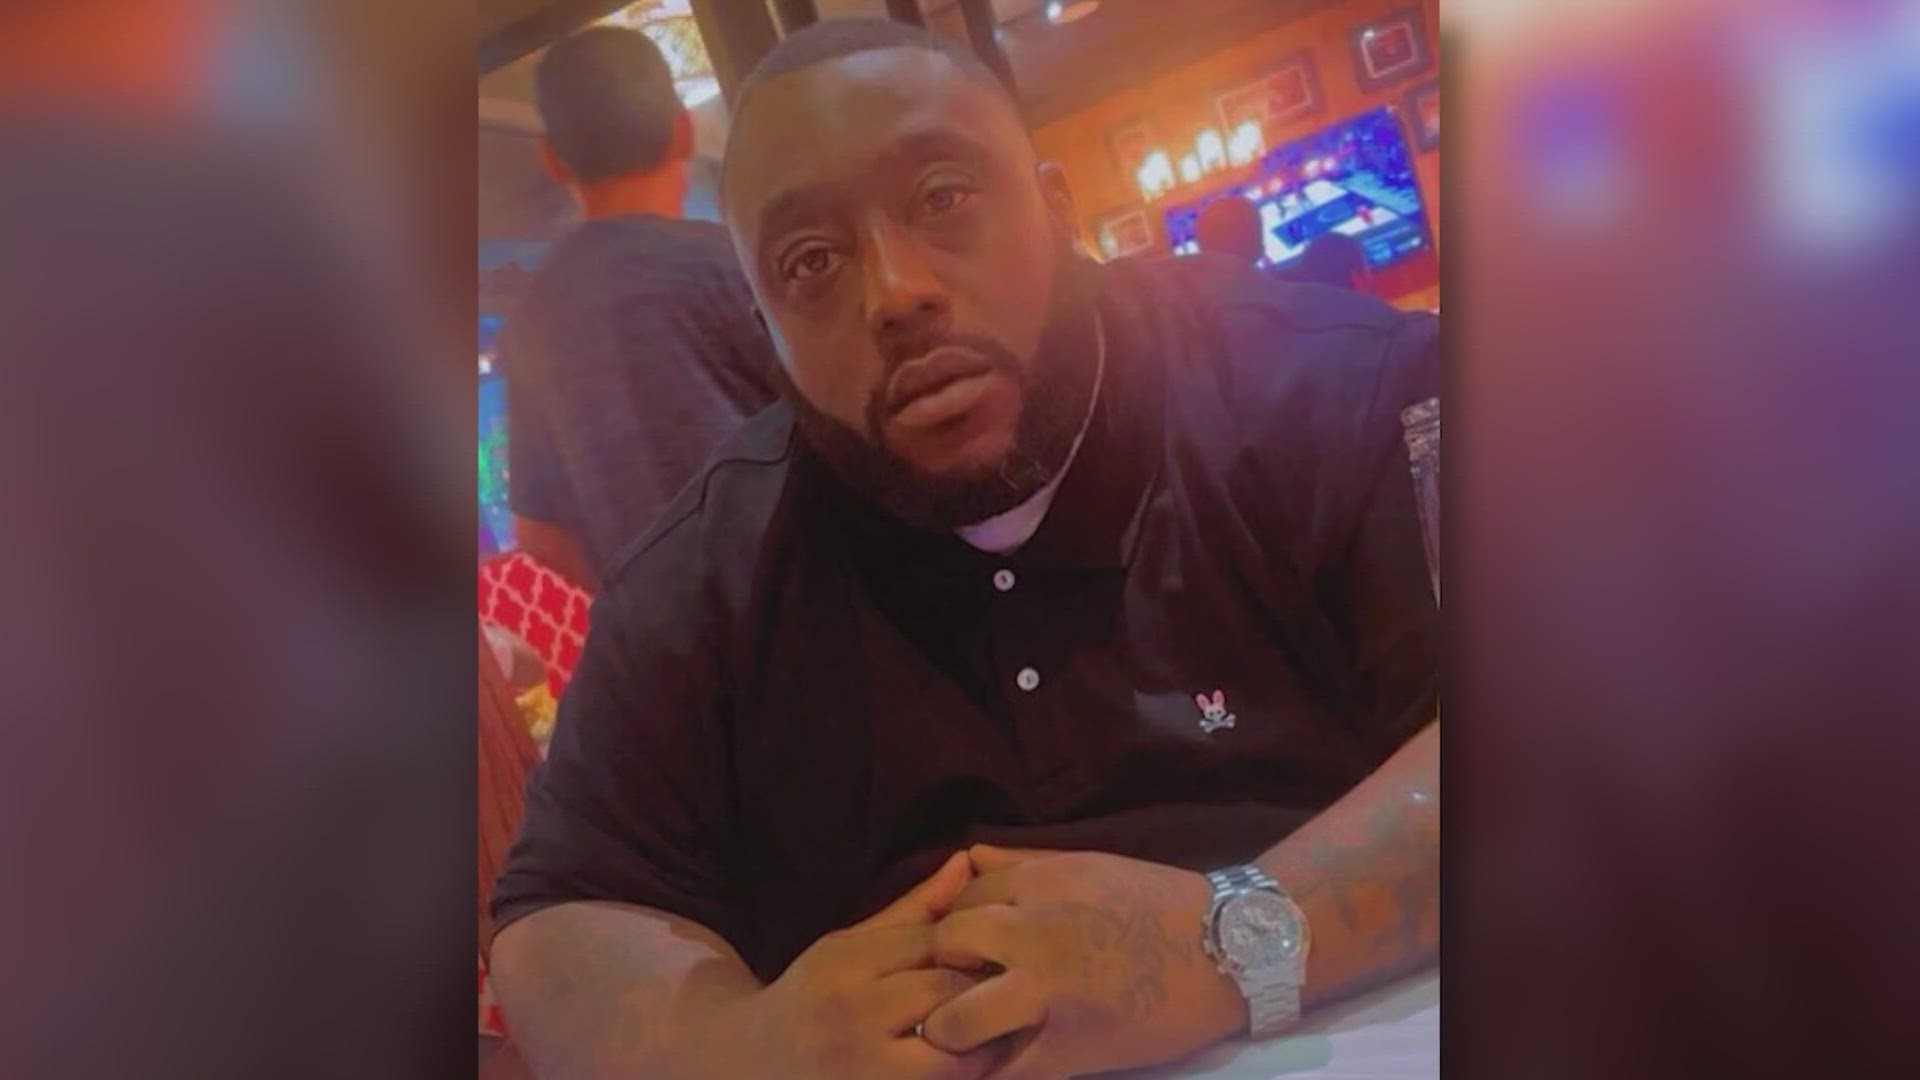 Family members say 38-year-old Jerron Albritton was the victim killed.